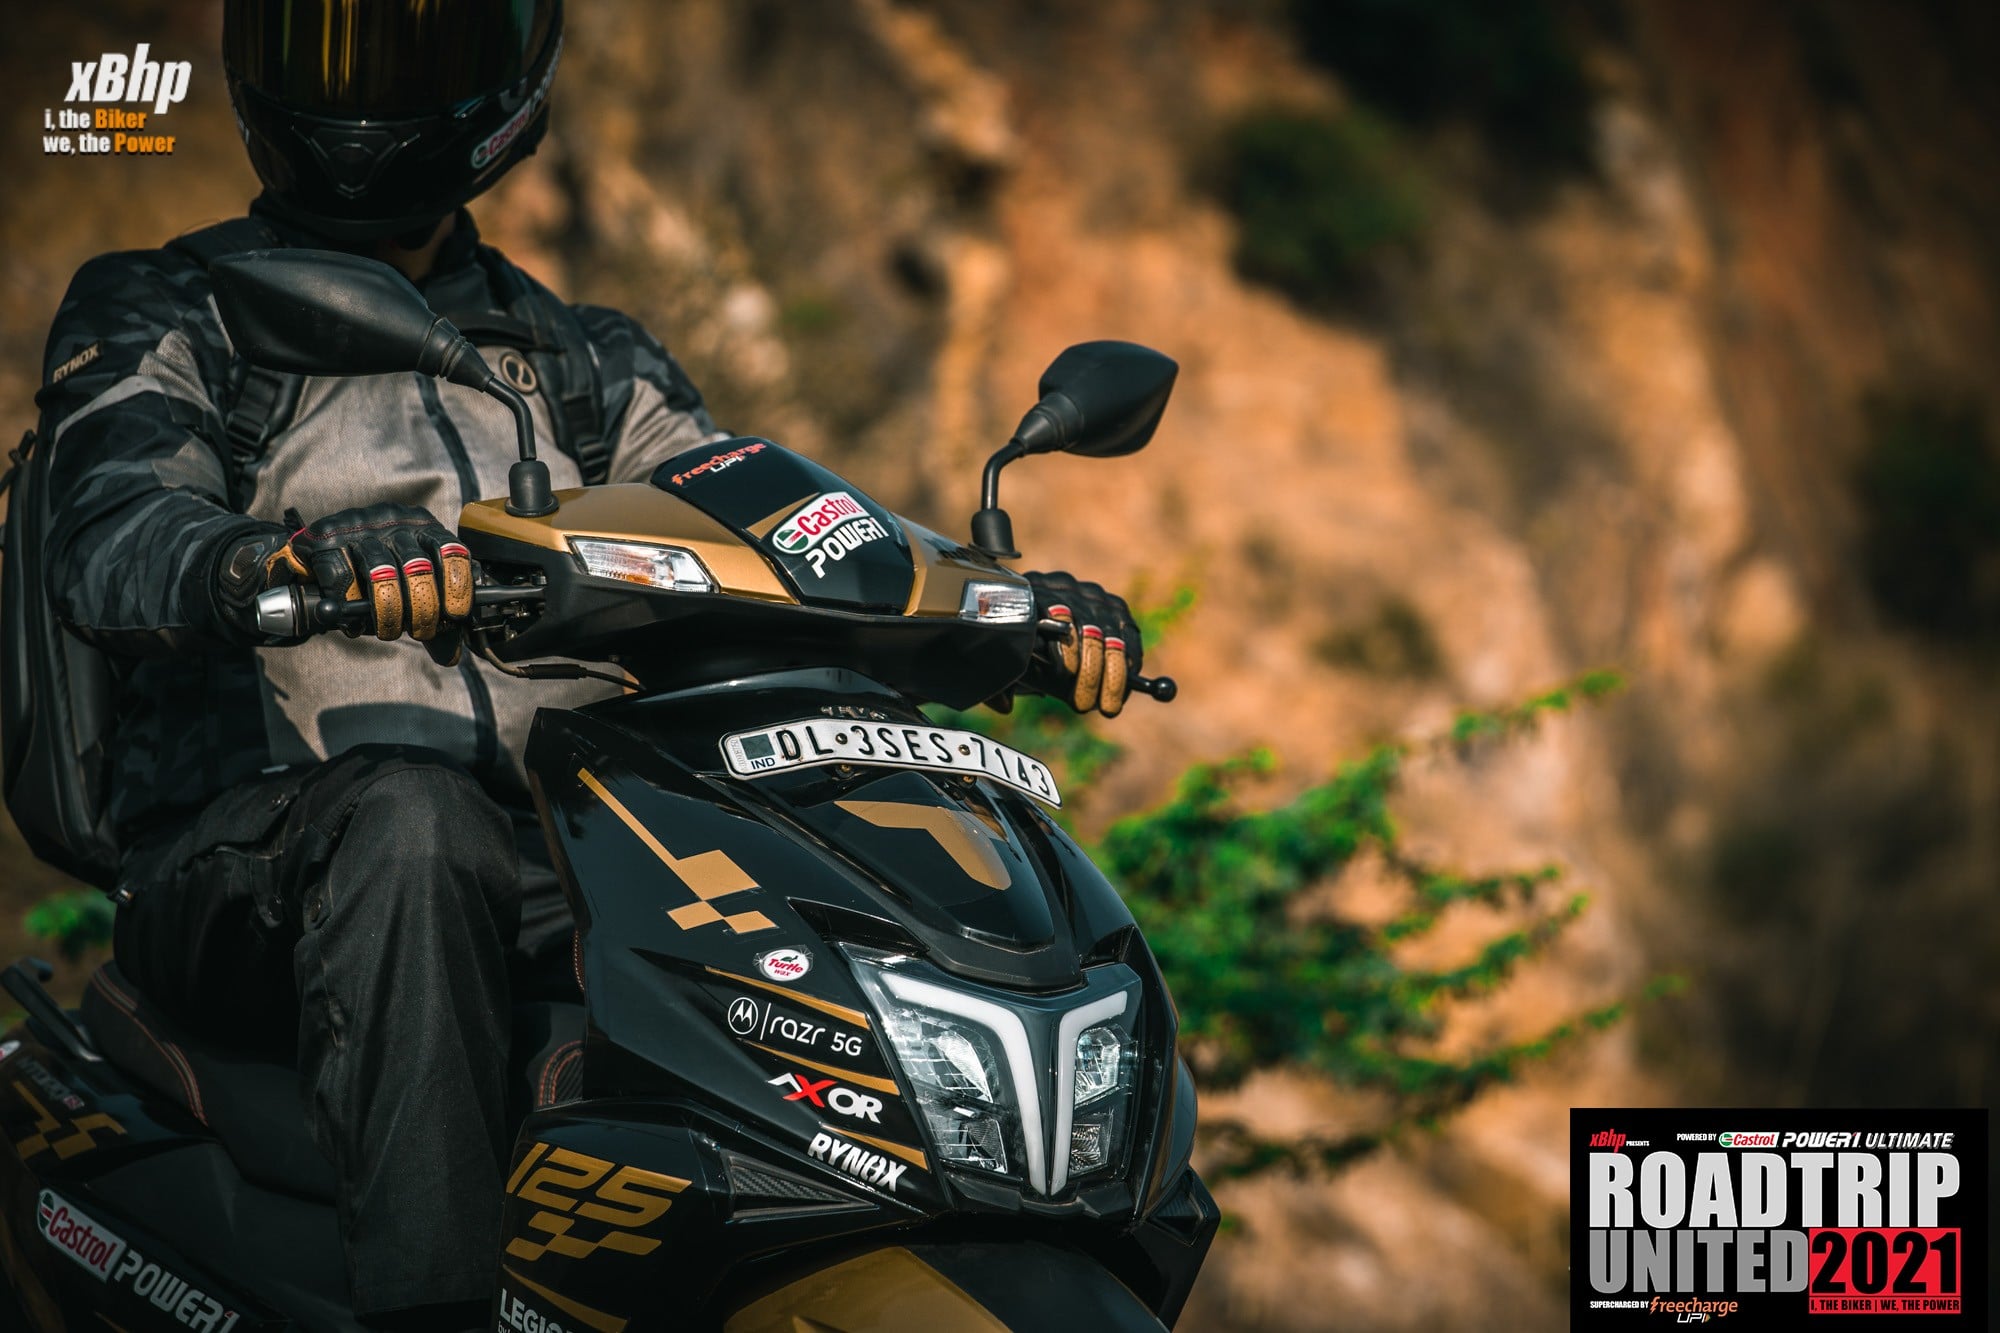 Who is Riding ? – #roadTripUnited2021 by xBhp